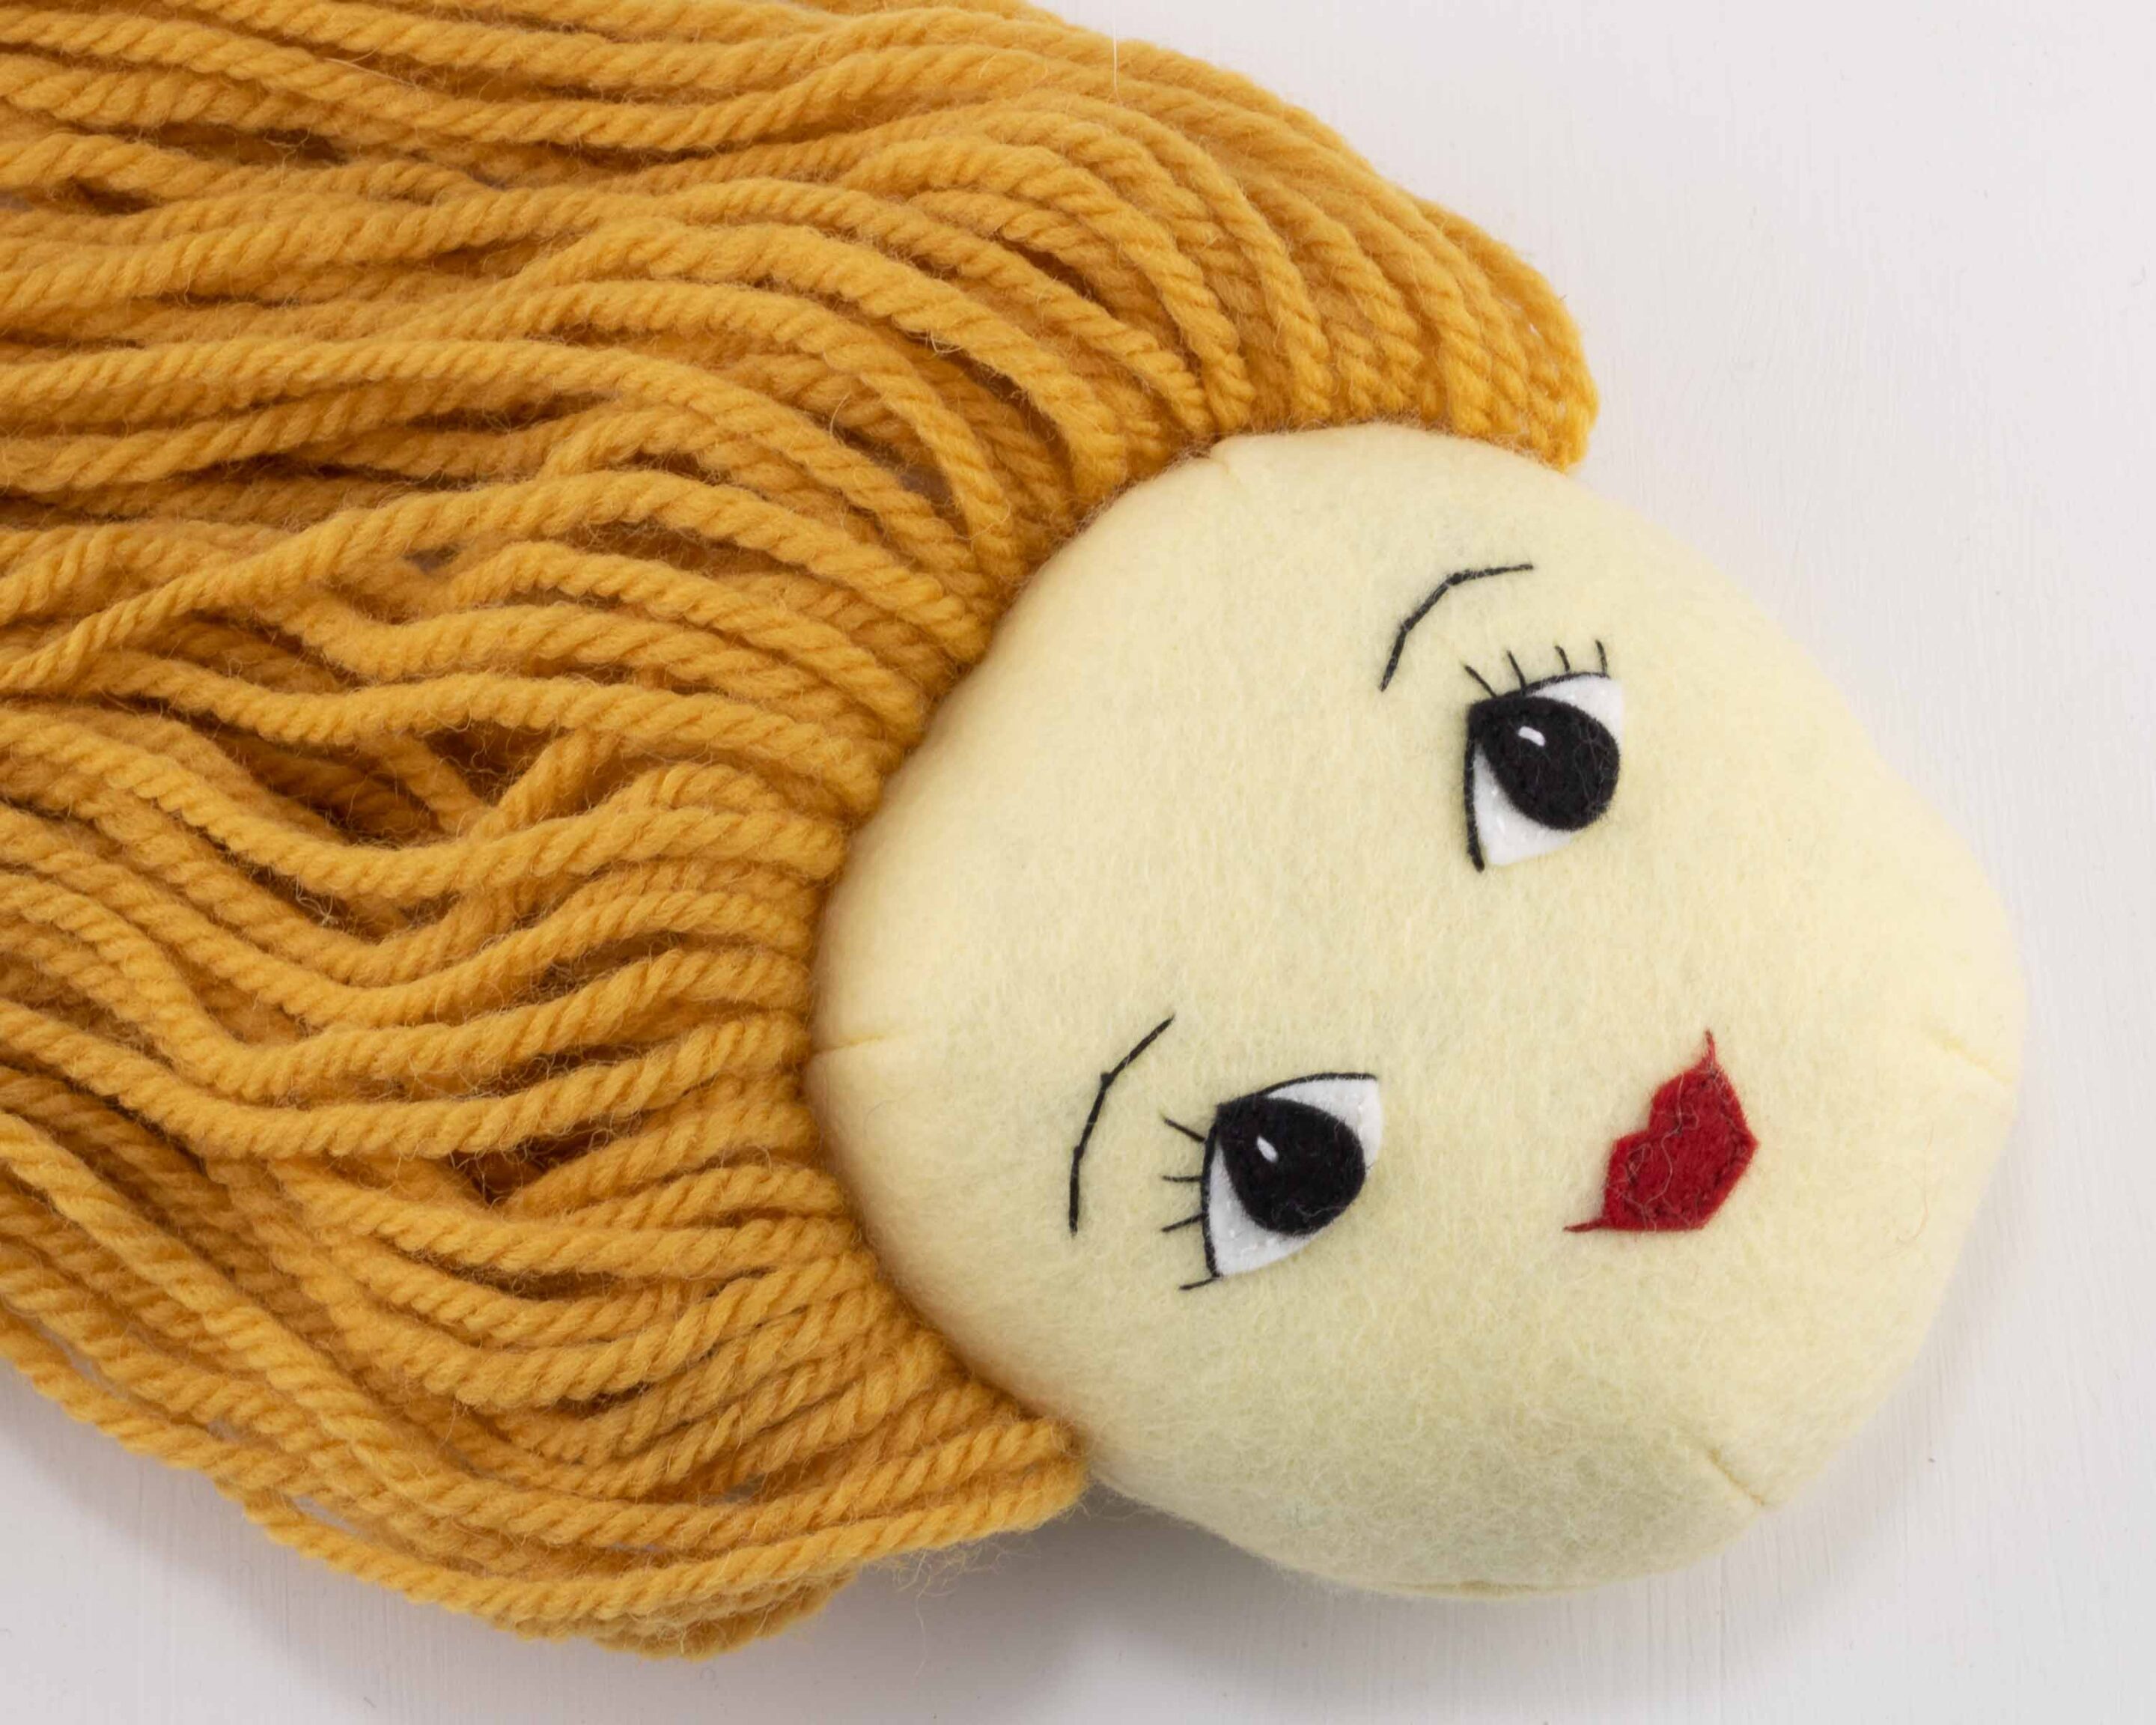 How to Make a Tilly Doll with Yarn Hair | Tilly & Puffin